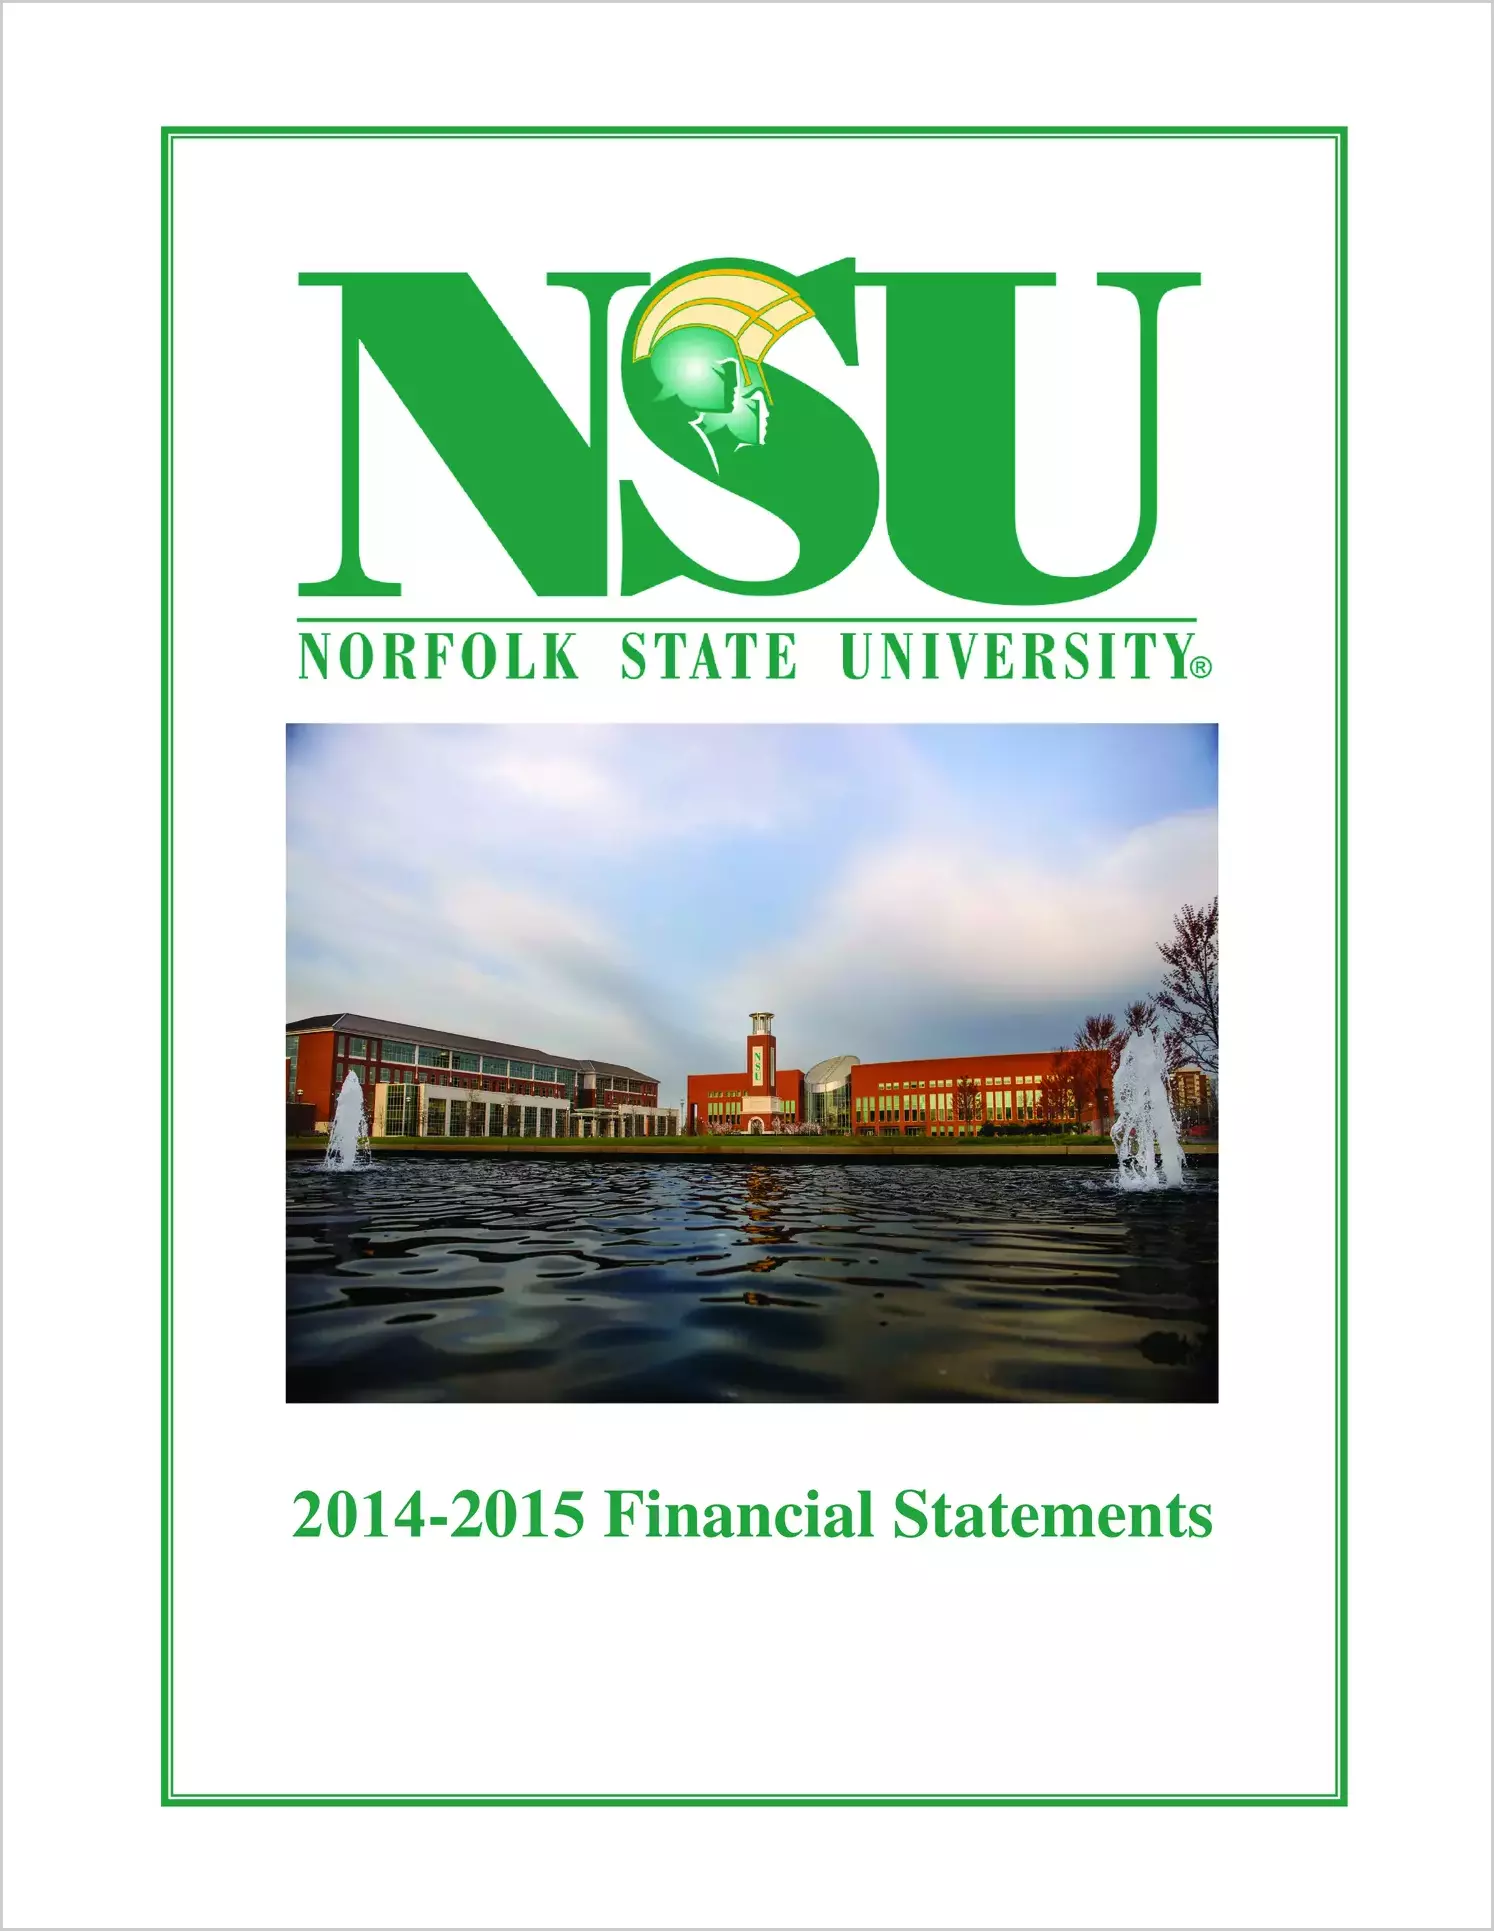 Norfolk State University Financial Statements report on audit for the year ended June 30, 2015